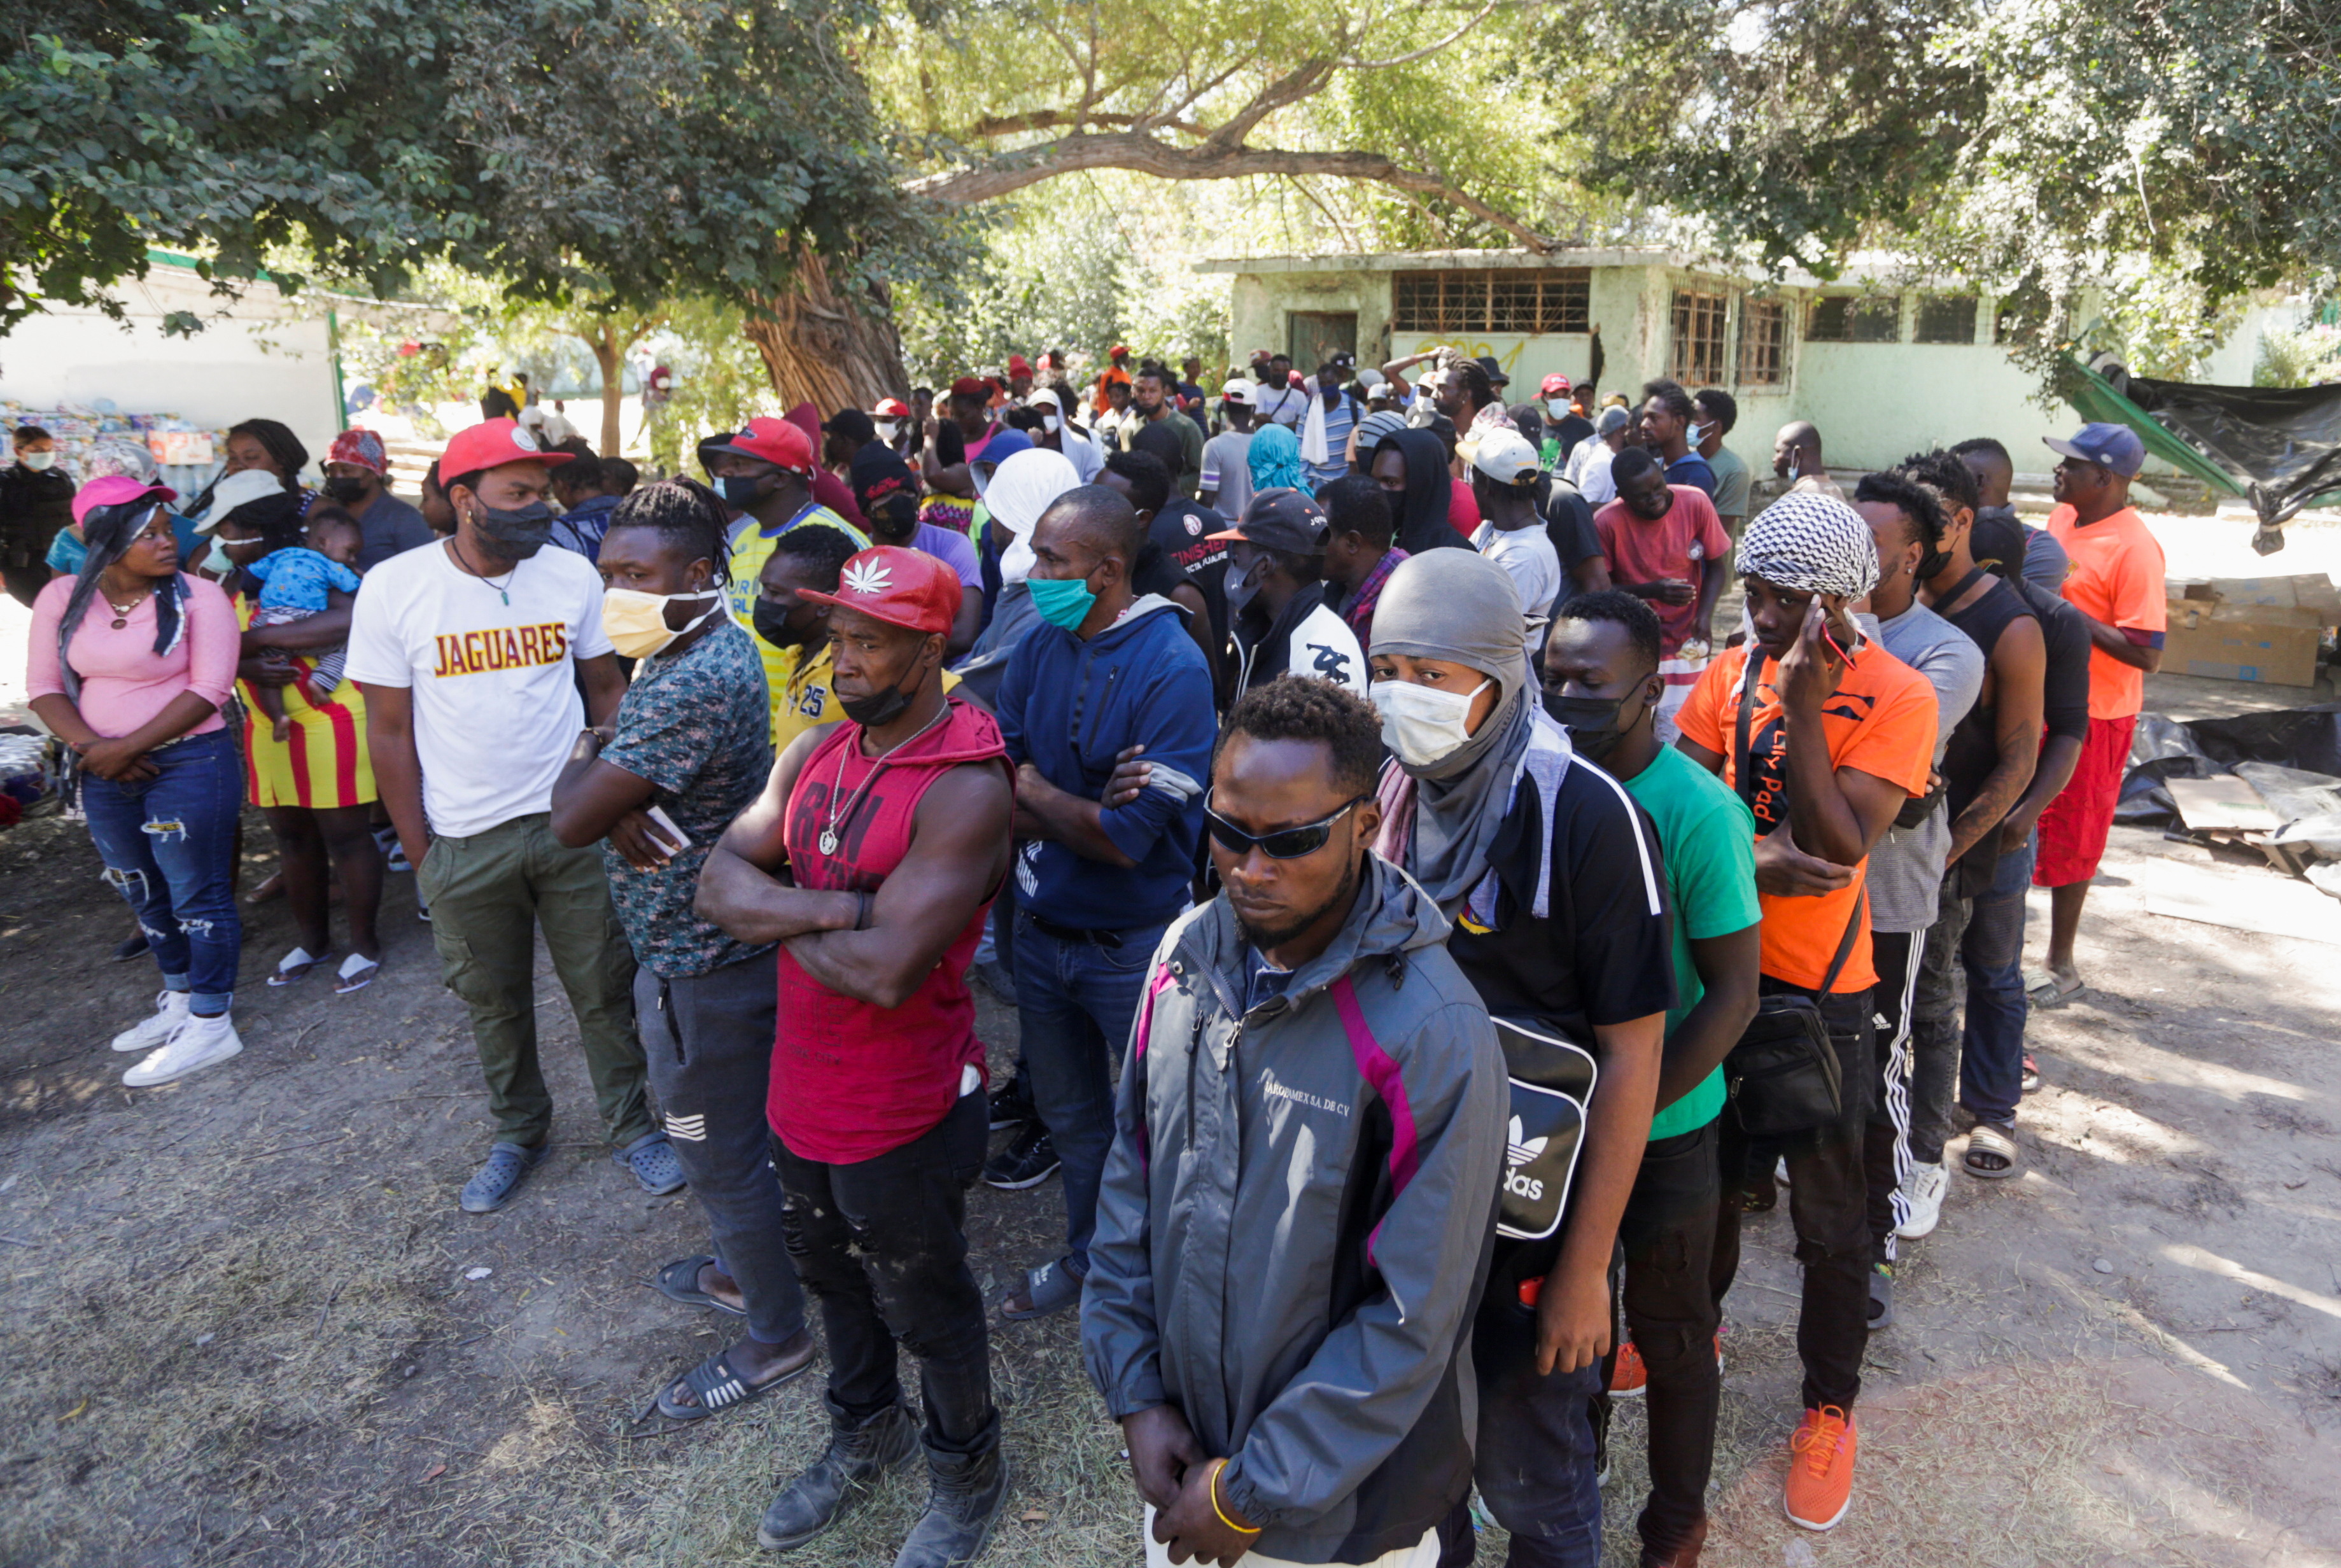 Haitian migrants urged by Mexican officials to leave Texas border, in Ciudad Acuna